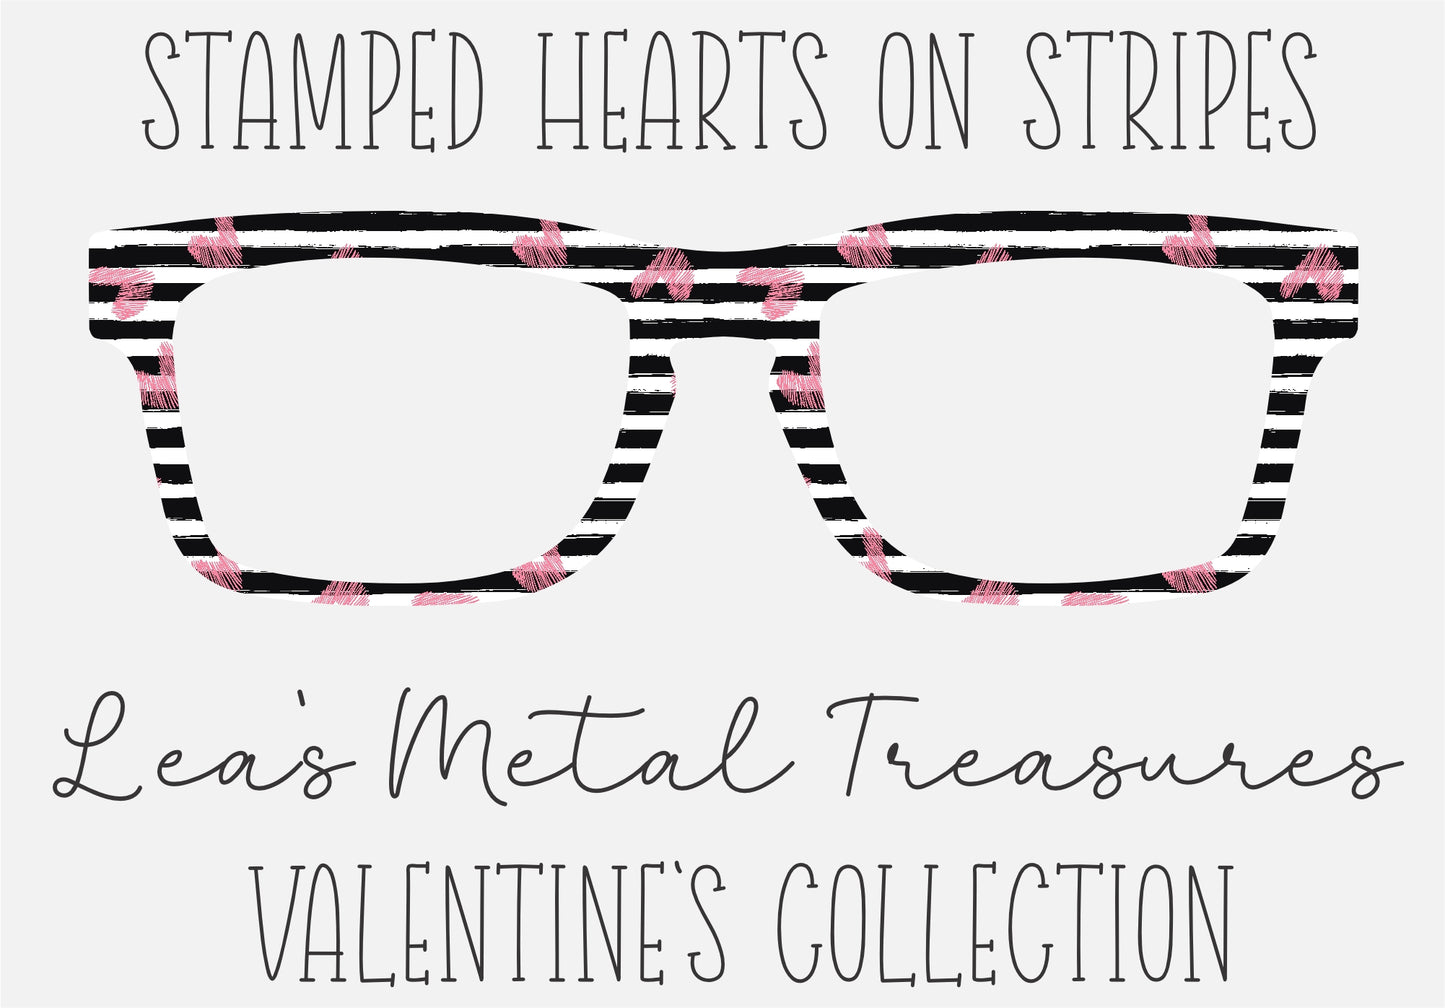 Stamped Hearts on Stripes